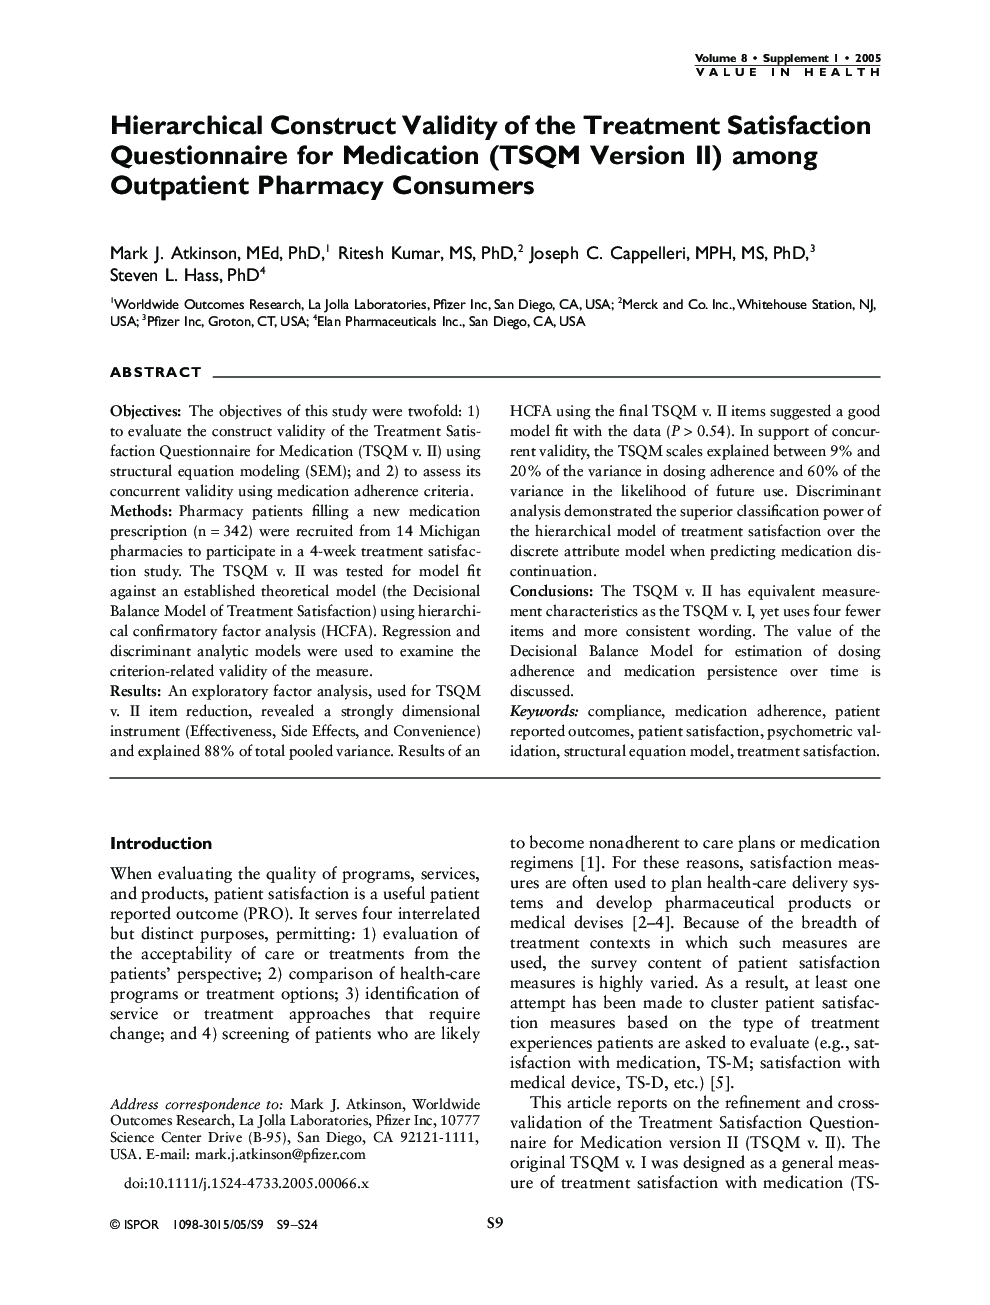 Hierarchical Construct Validity of the Treatment Satisfaction Questionnaire for Medication (TSQM Version II) among Outpatient Pharmacy Consumers